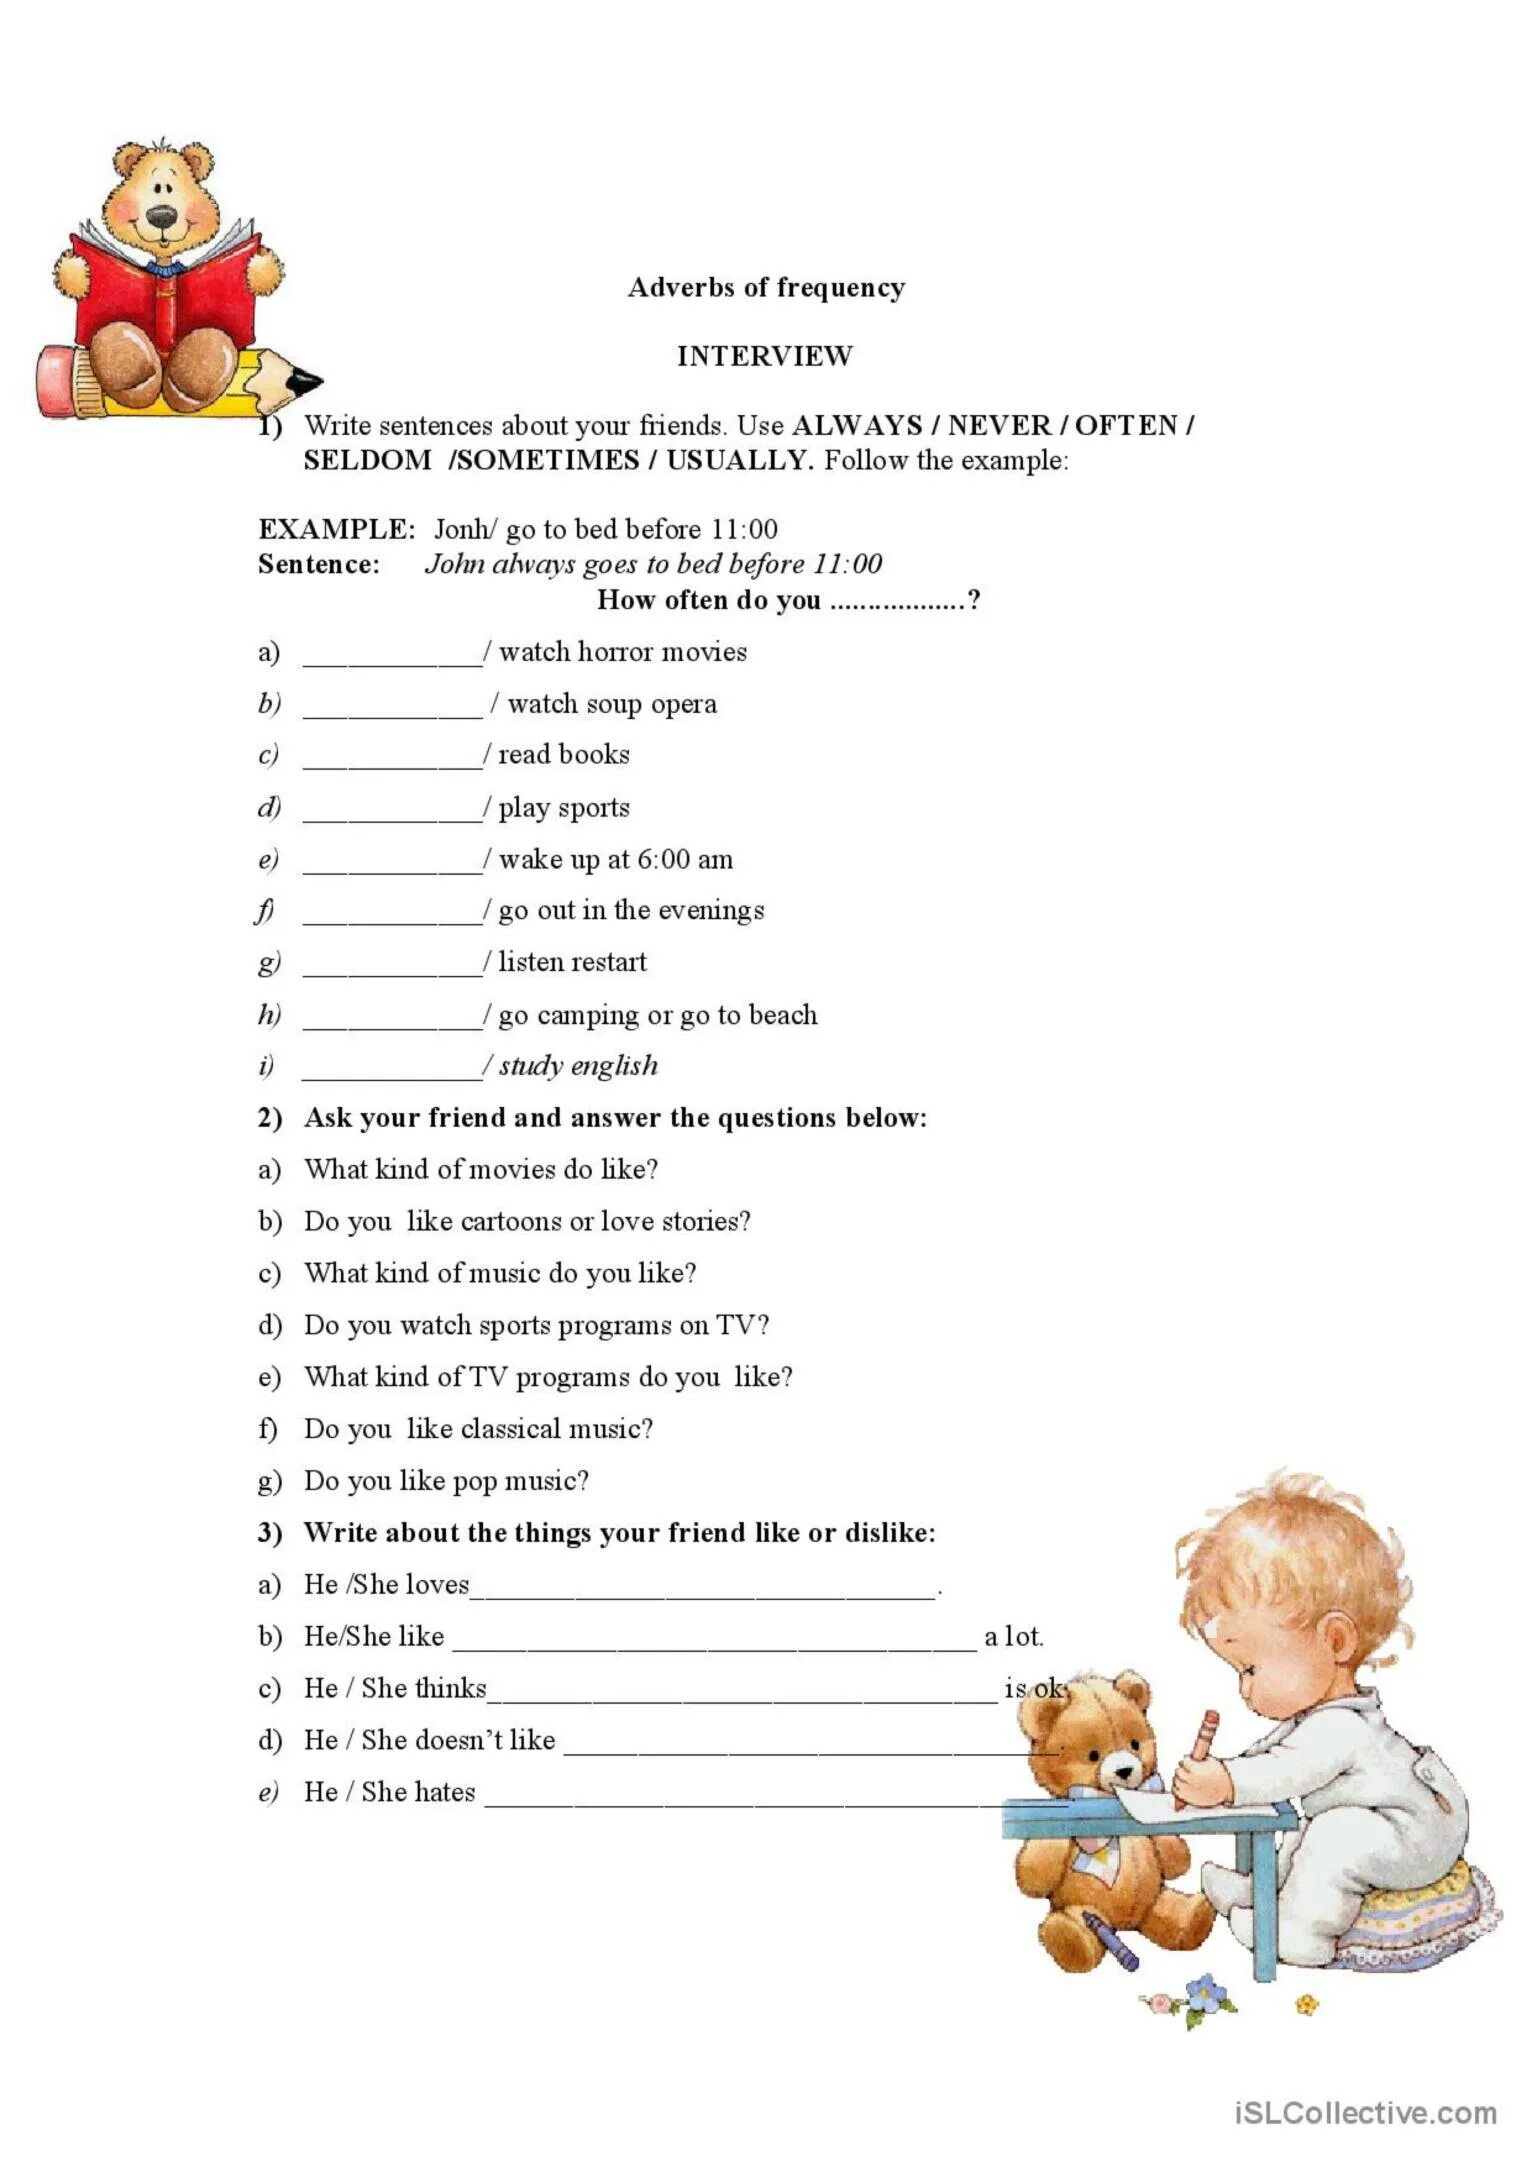 Adverbs of Frequency. Adverbs of Frequency exercise. Adverbs of Frequency Worksheets for Kids. Adverbs of Frequency Worksheets. Adverbs of frequency in the sentence